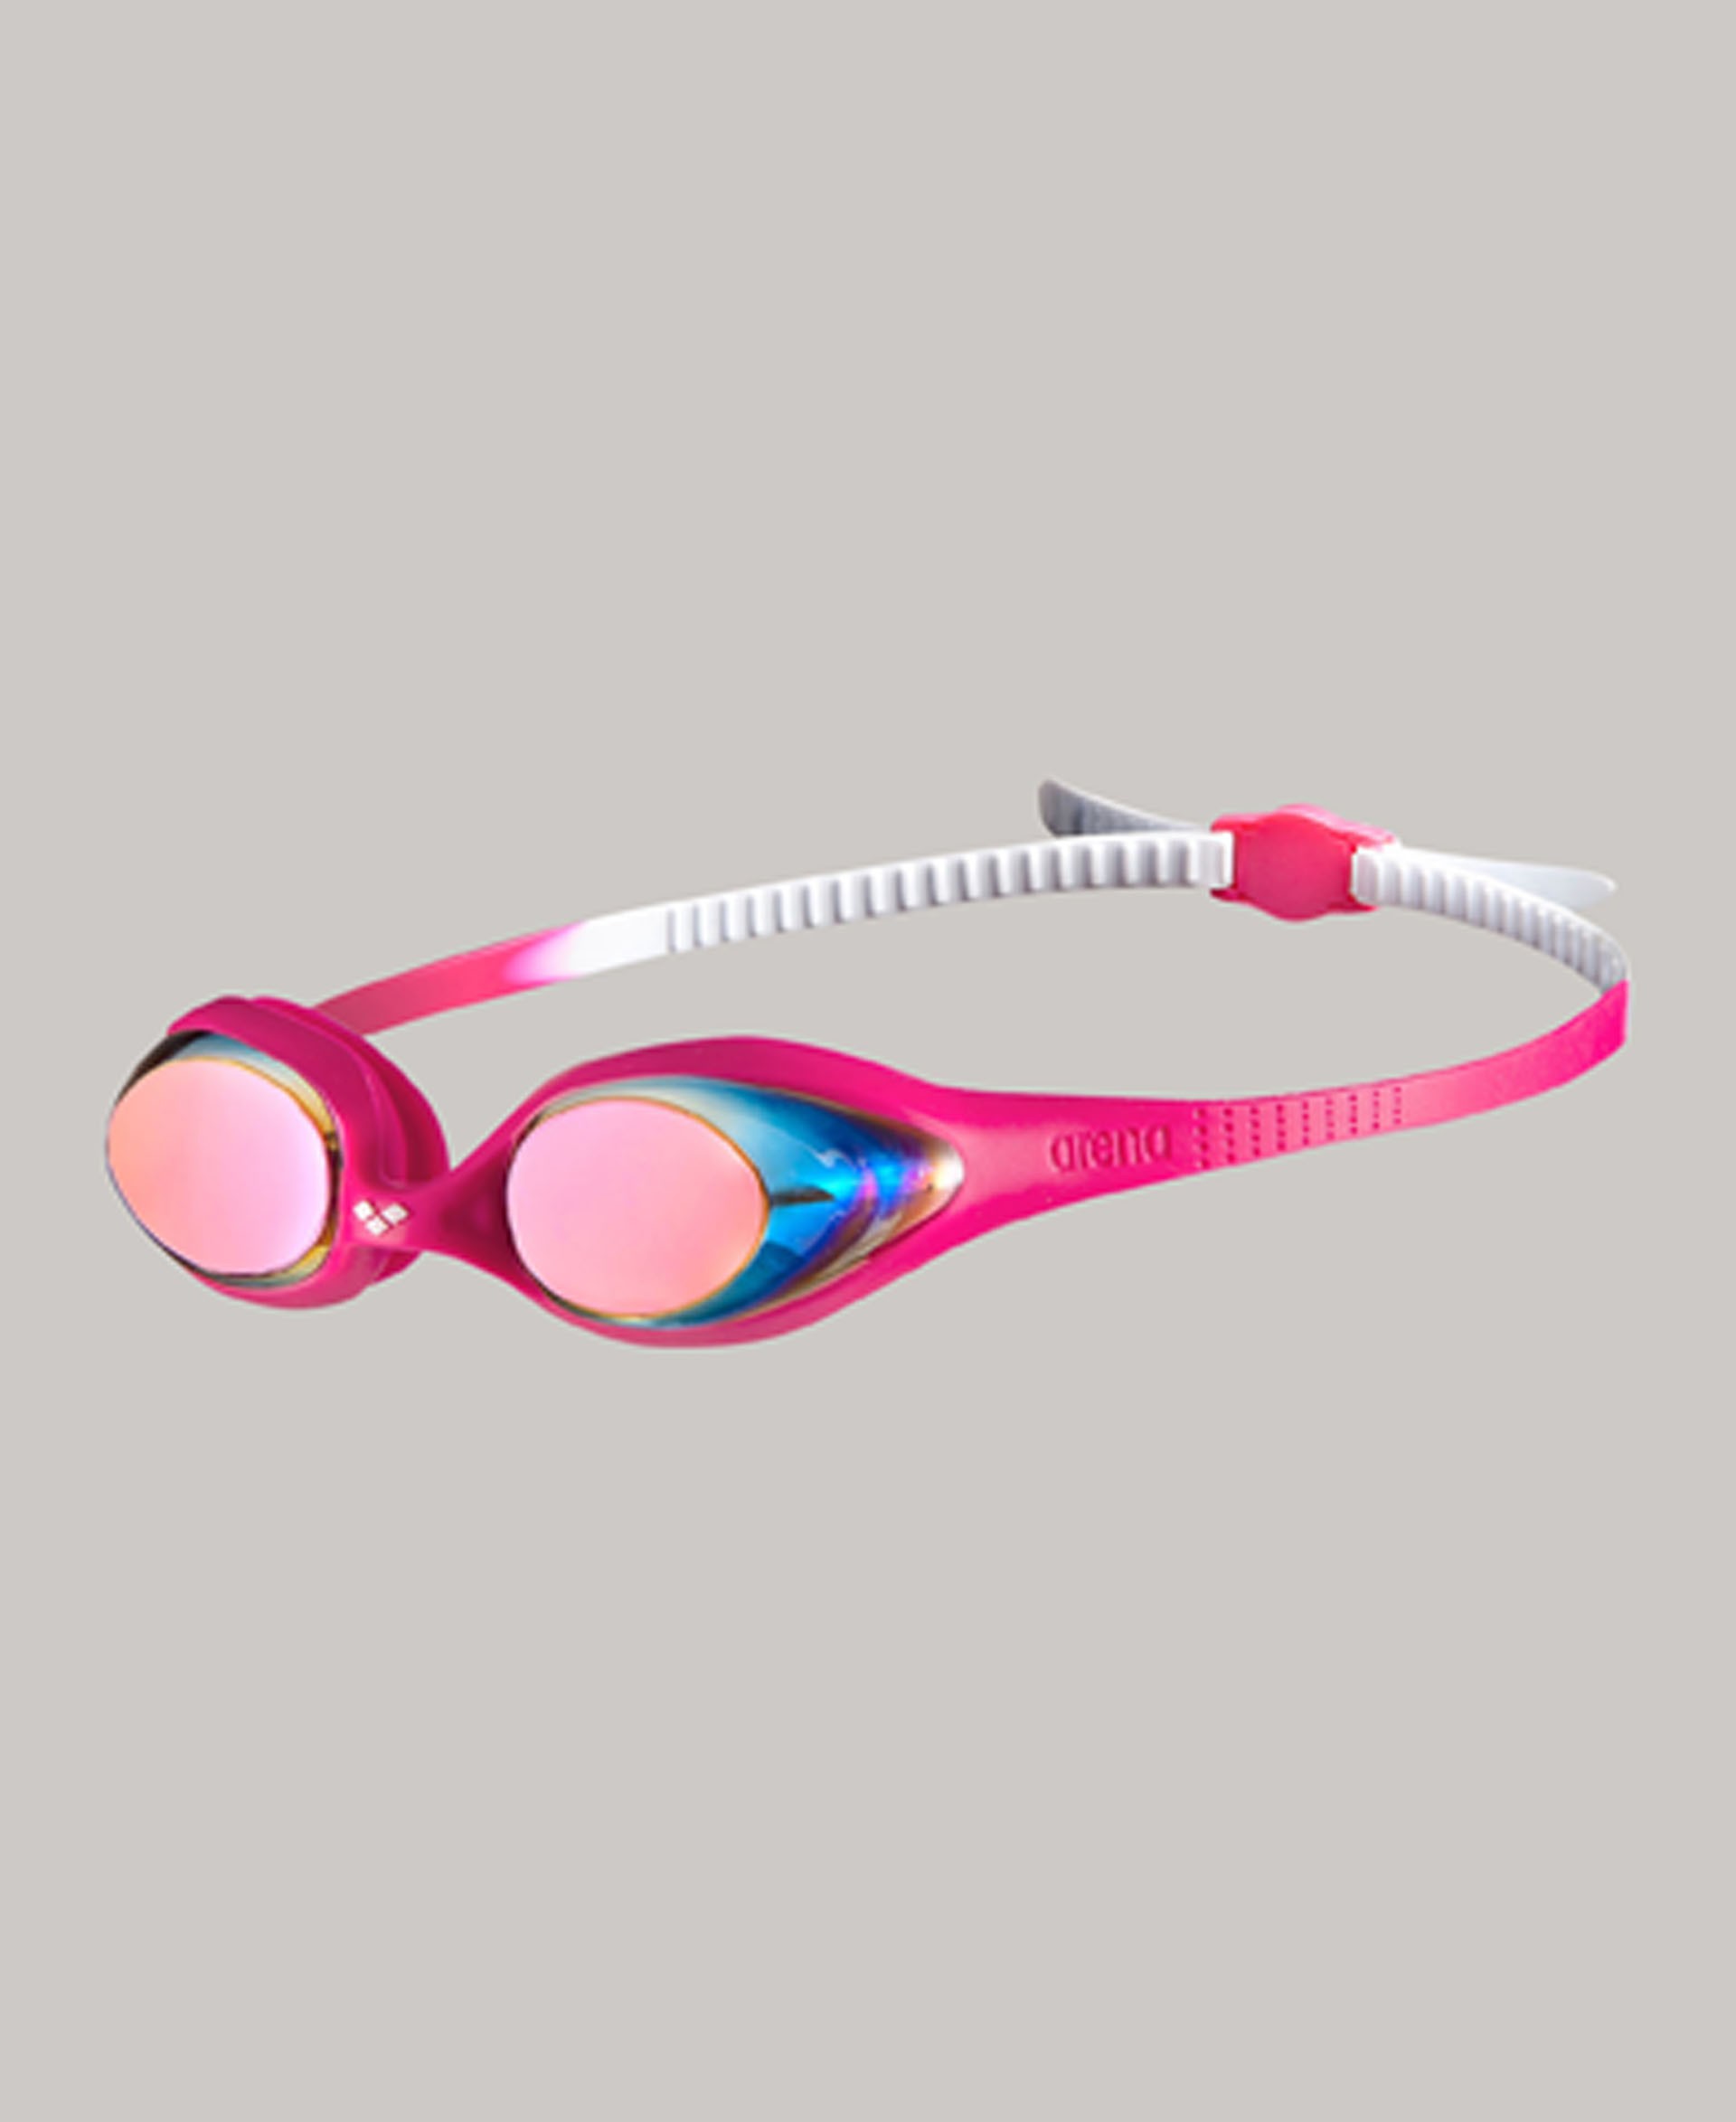 Details about   Arena Spider Jr Youth Swim Goggles 